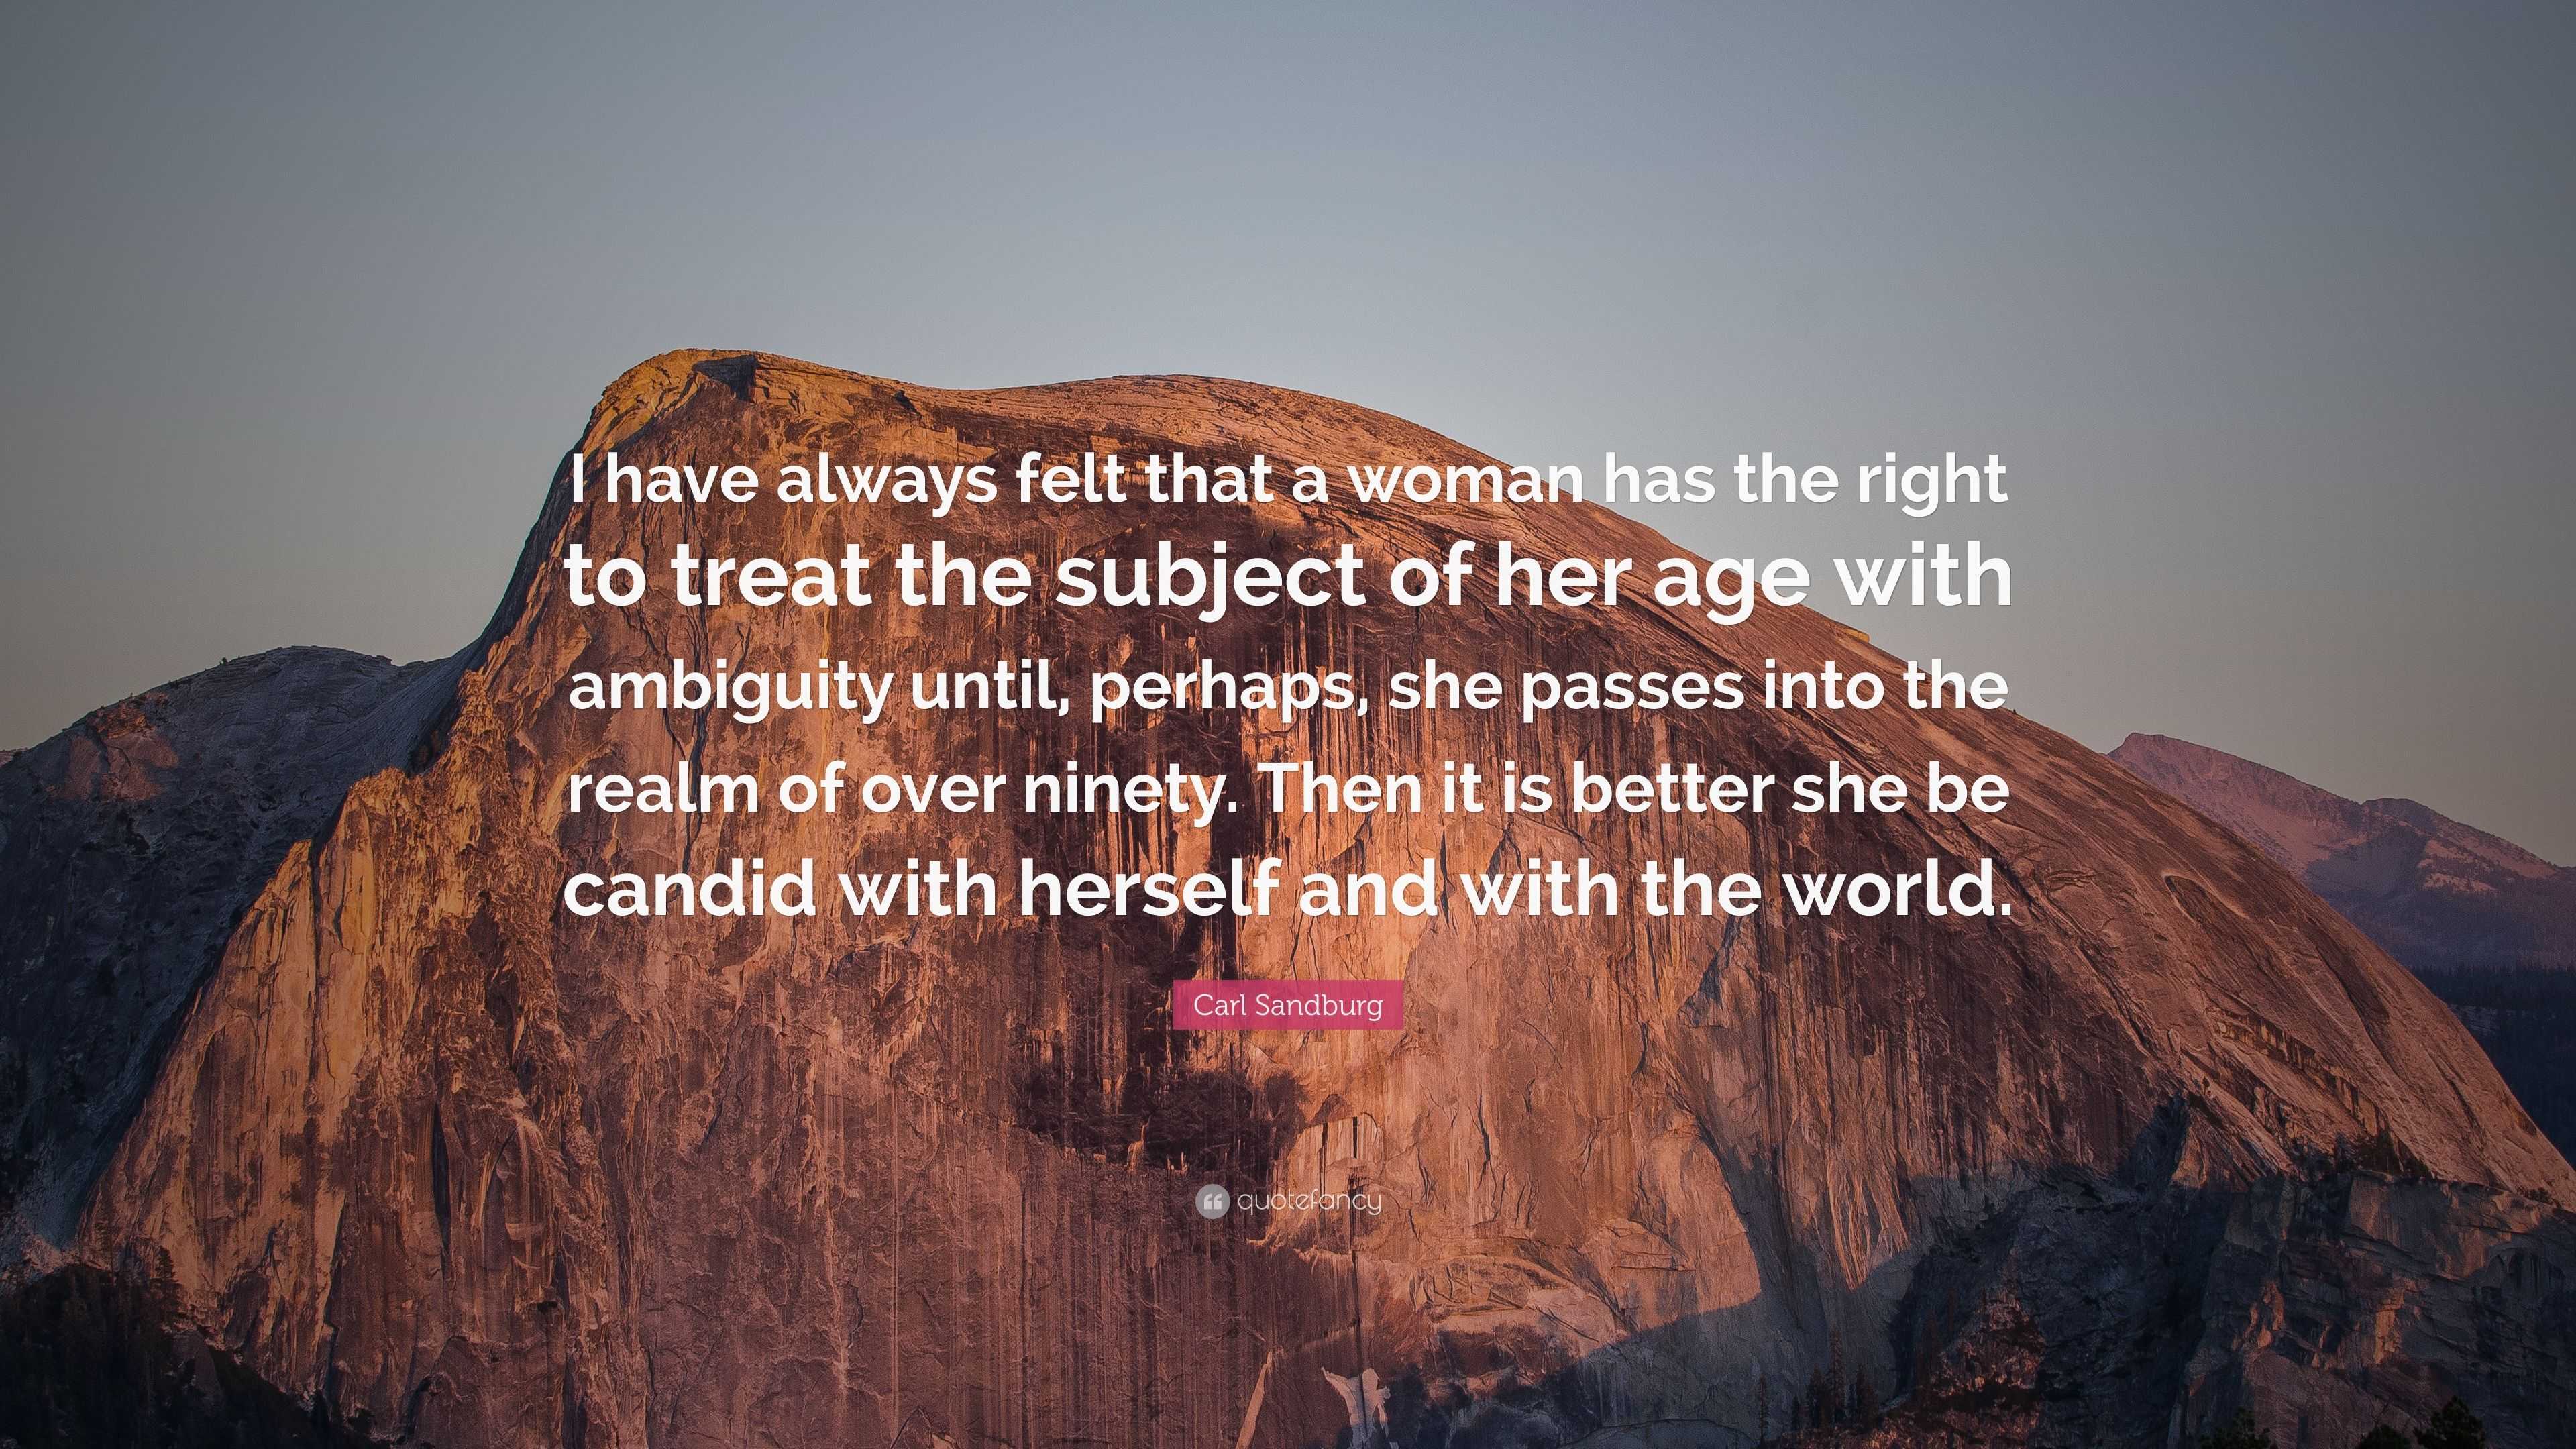 Carl Sandburg Quote: “I have always felt that a woman has the right to ...